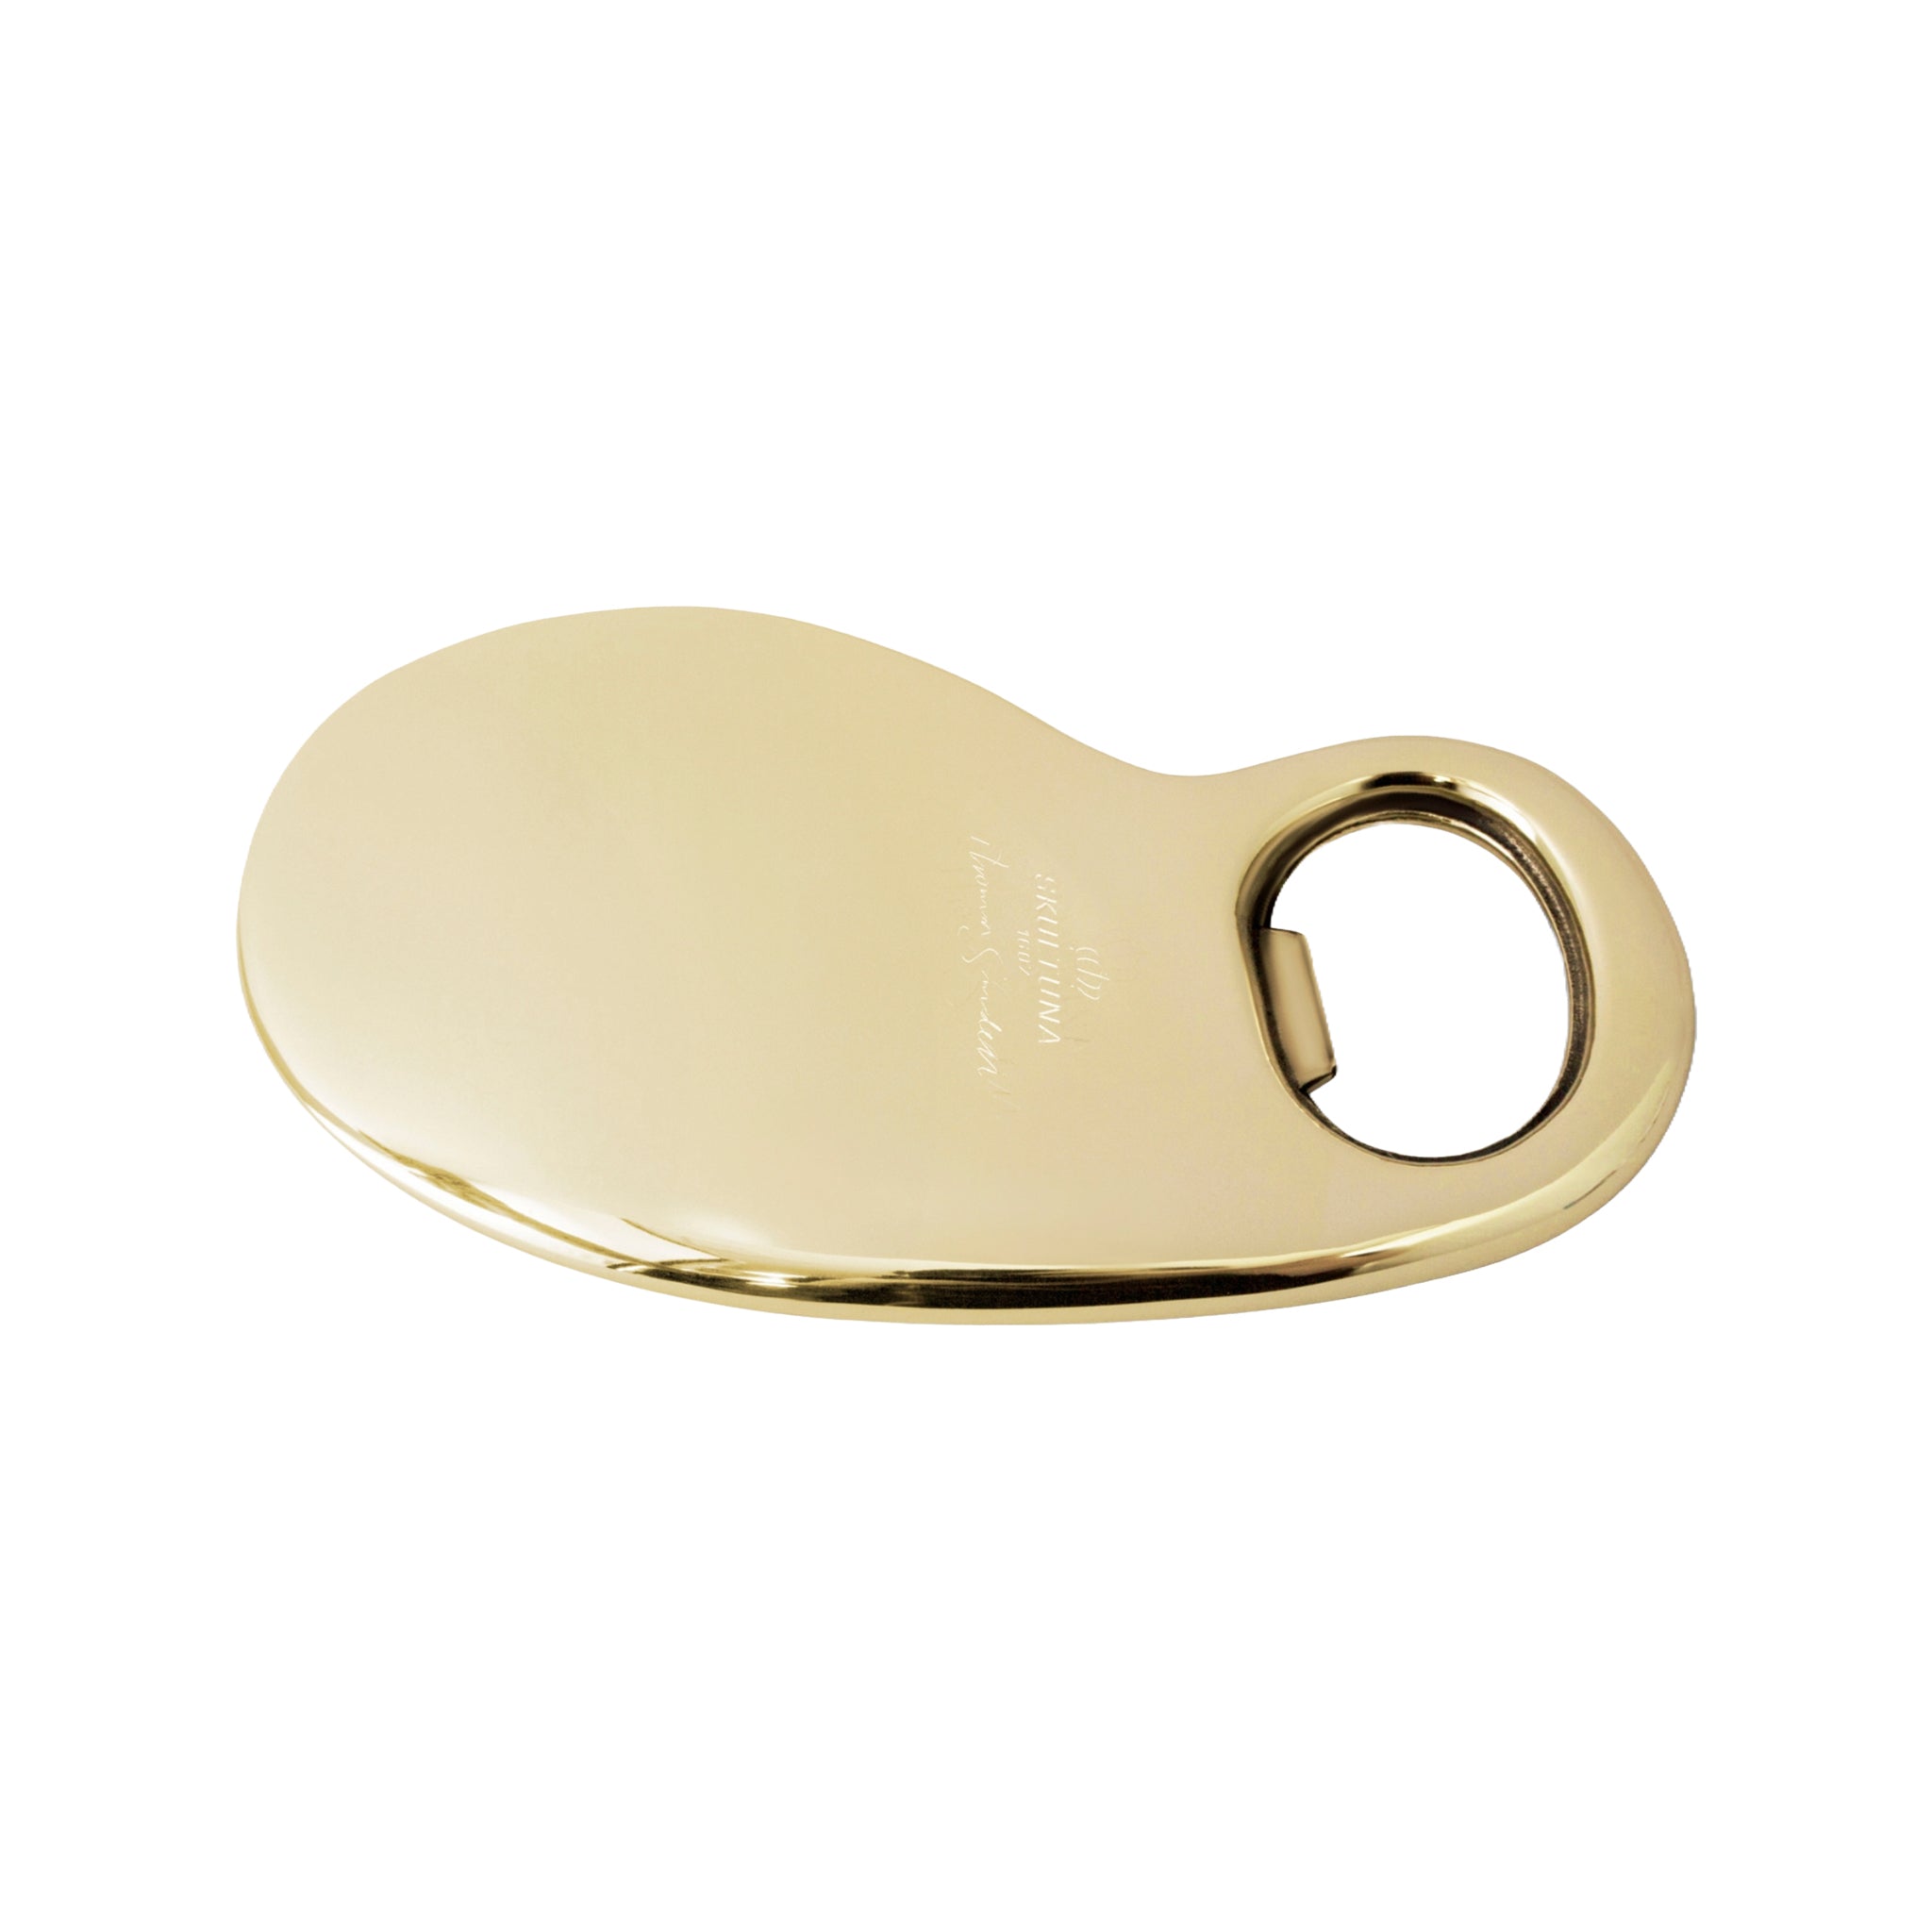 A sleek, gold-colored bottle opener with a fluid, kidney-shaped design and a circular opening on one end. Engraved on its surface is the text 'Skultuna 1607', indicating the brand and its founding year. The bottle opener is presented on a white background, with a reflective surface that accentuates its metallic sheen and elegant curves.